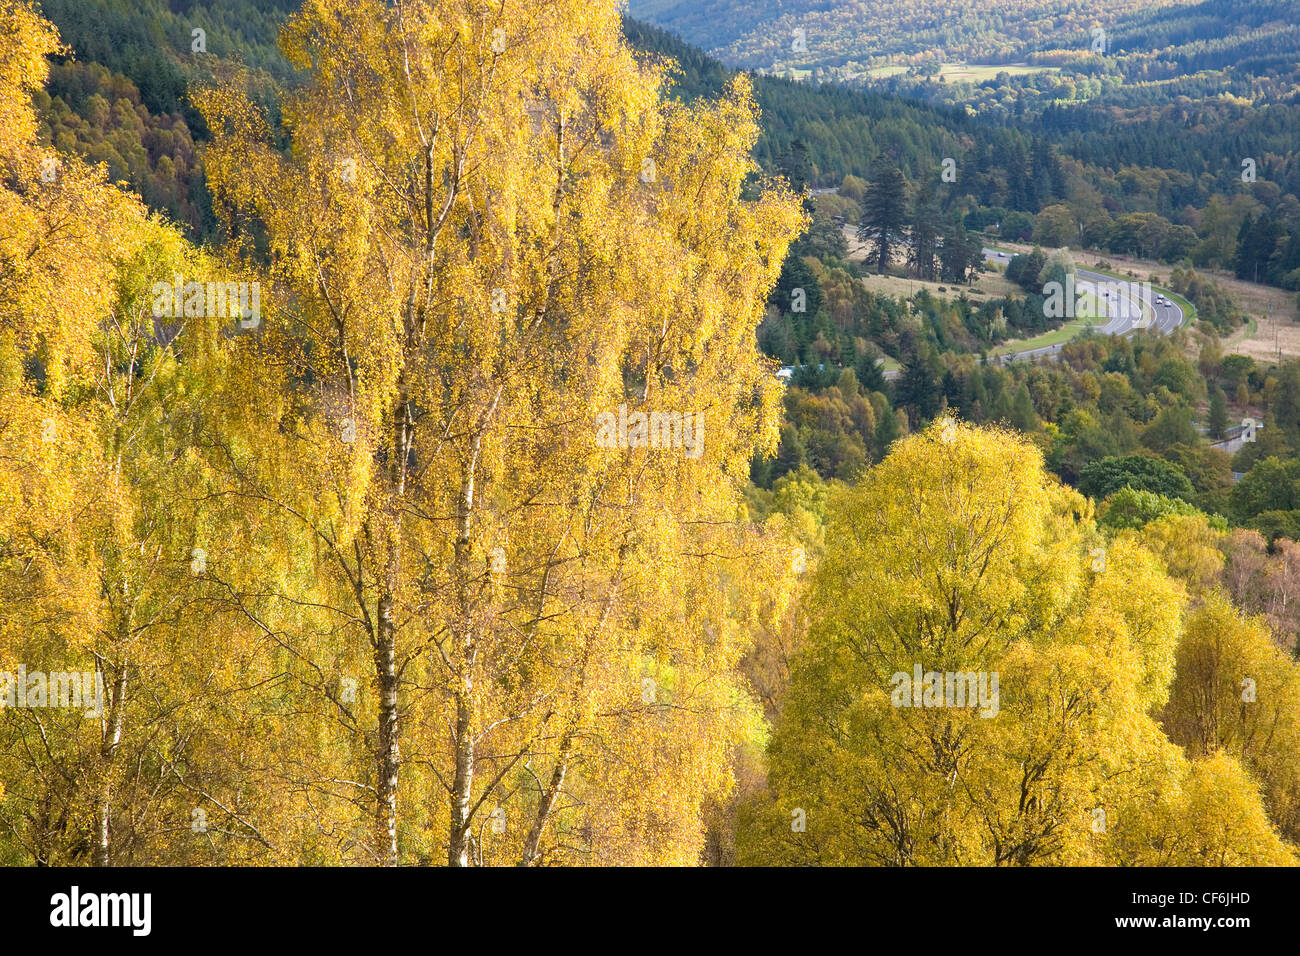 Pitlochry, Perth and Kinross, Scotland. View over forest of silver birch trees to Glen Garry and the A9 trunk road, autumn. Stock Photo